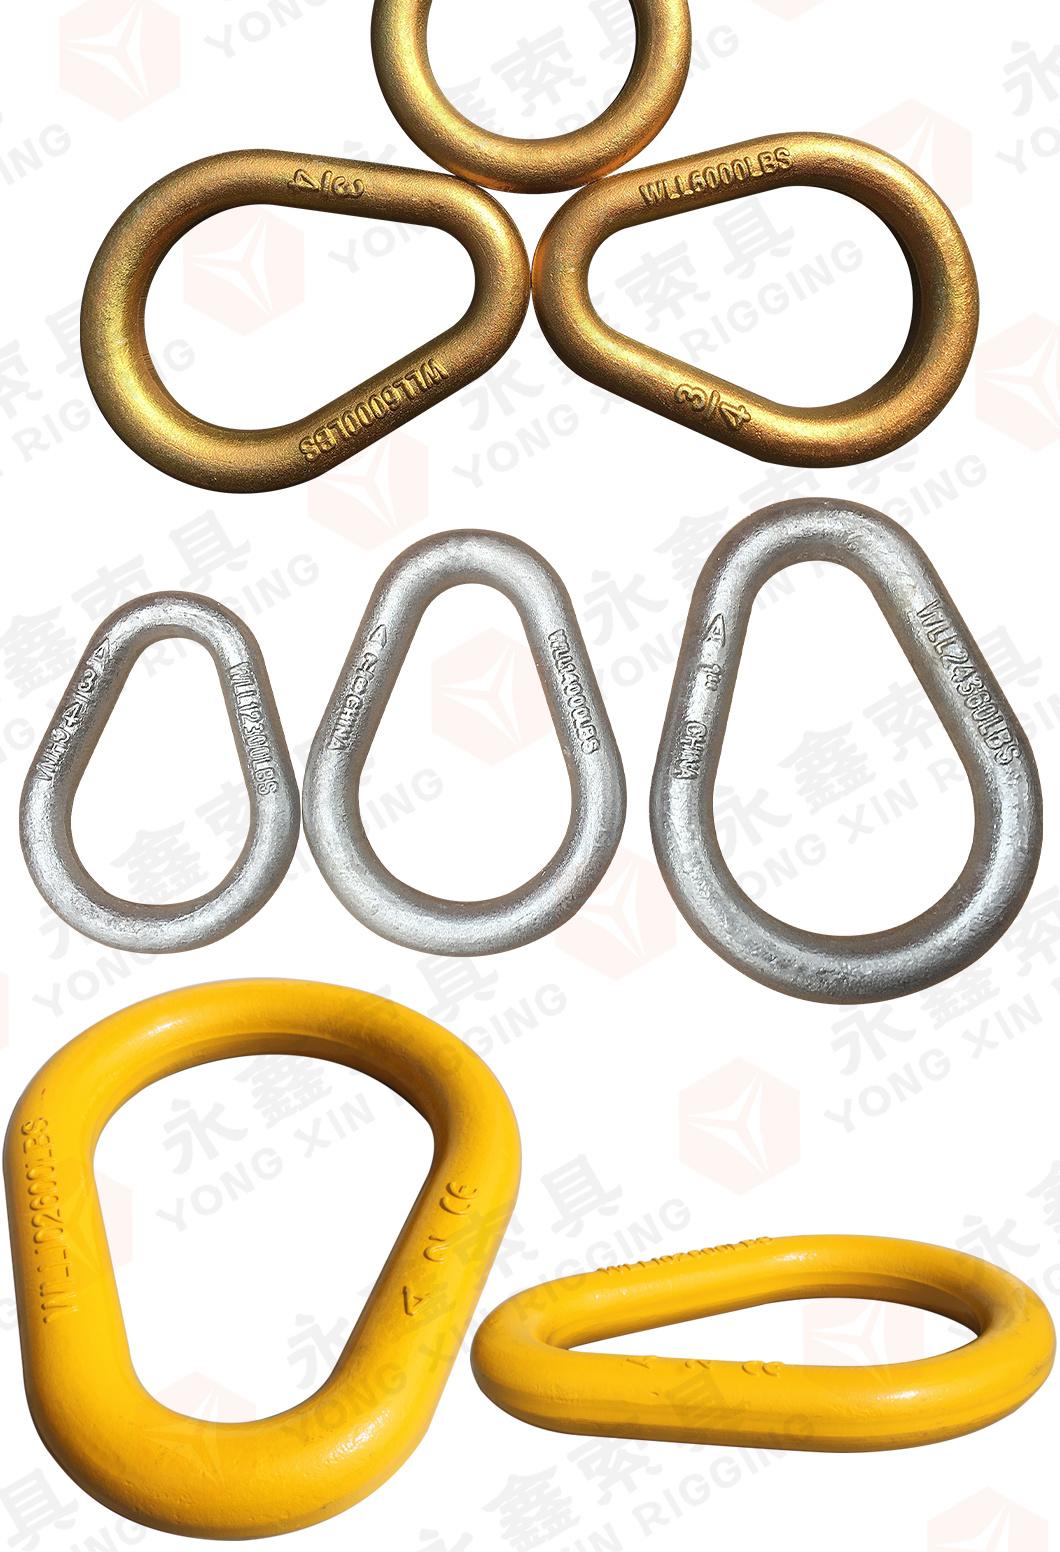 Drop Forged Alloy Steel Pear Shaped Link|Forged Pear Shape Link|Master Link